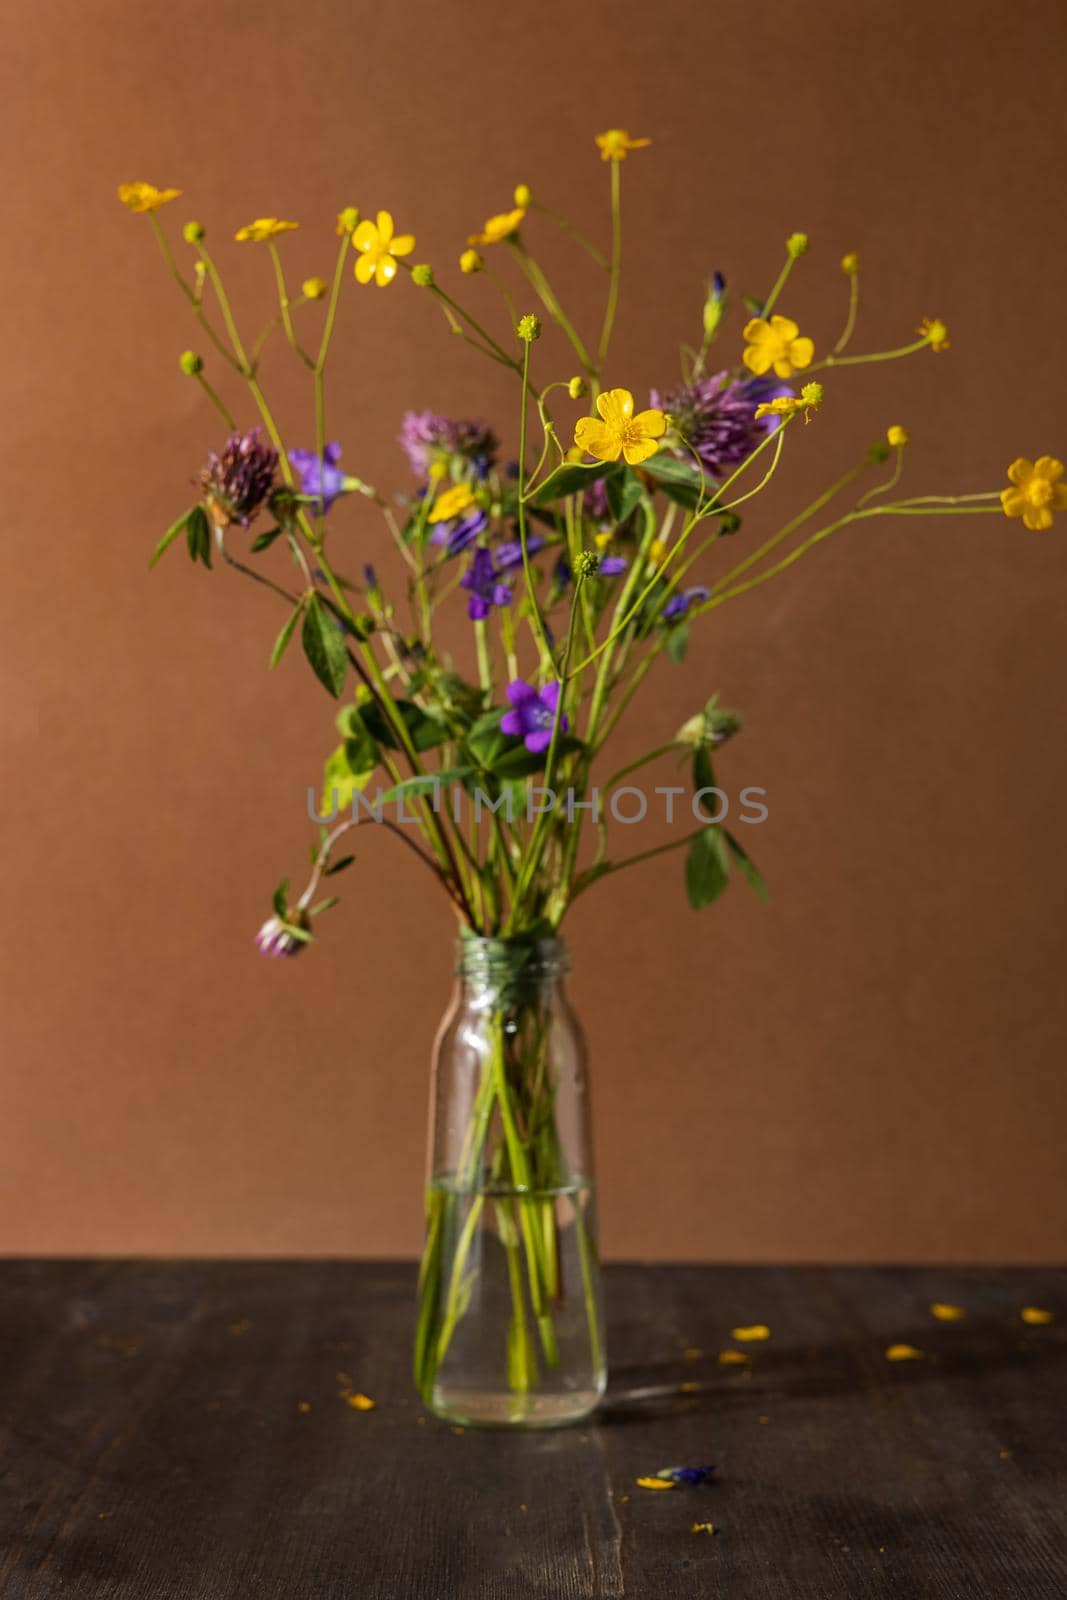 Bouquet of wild flowers on brown background, healing plant collection, still life composition by katrinaera